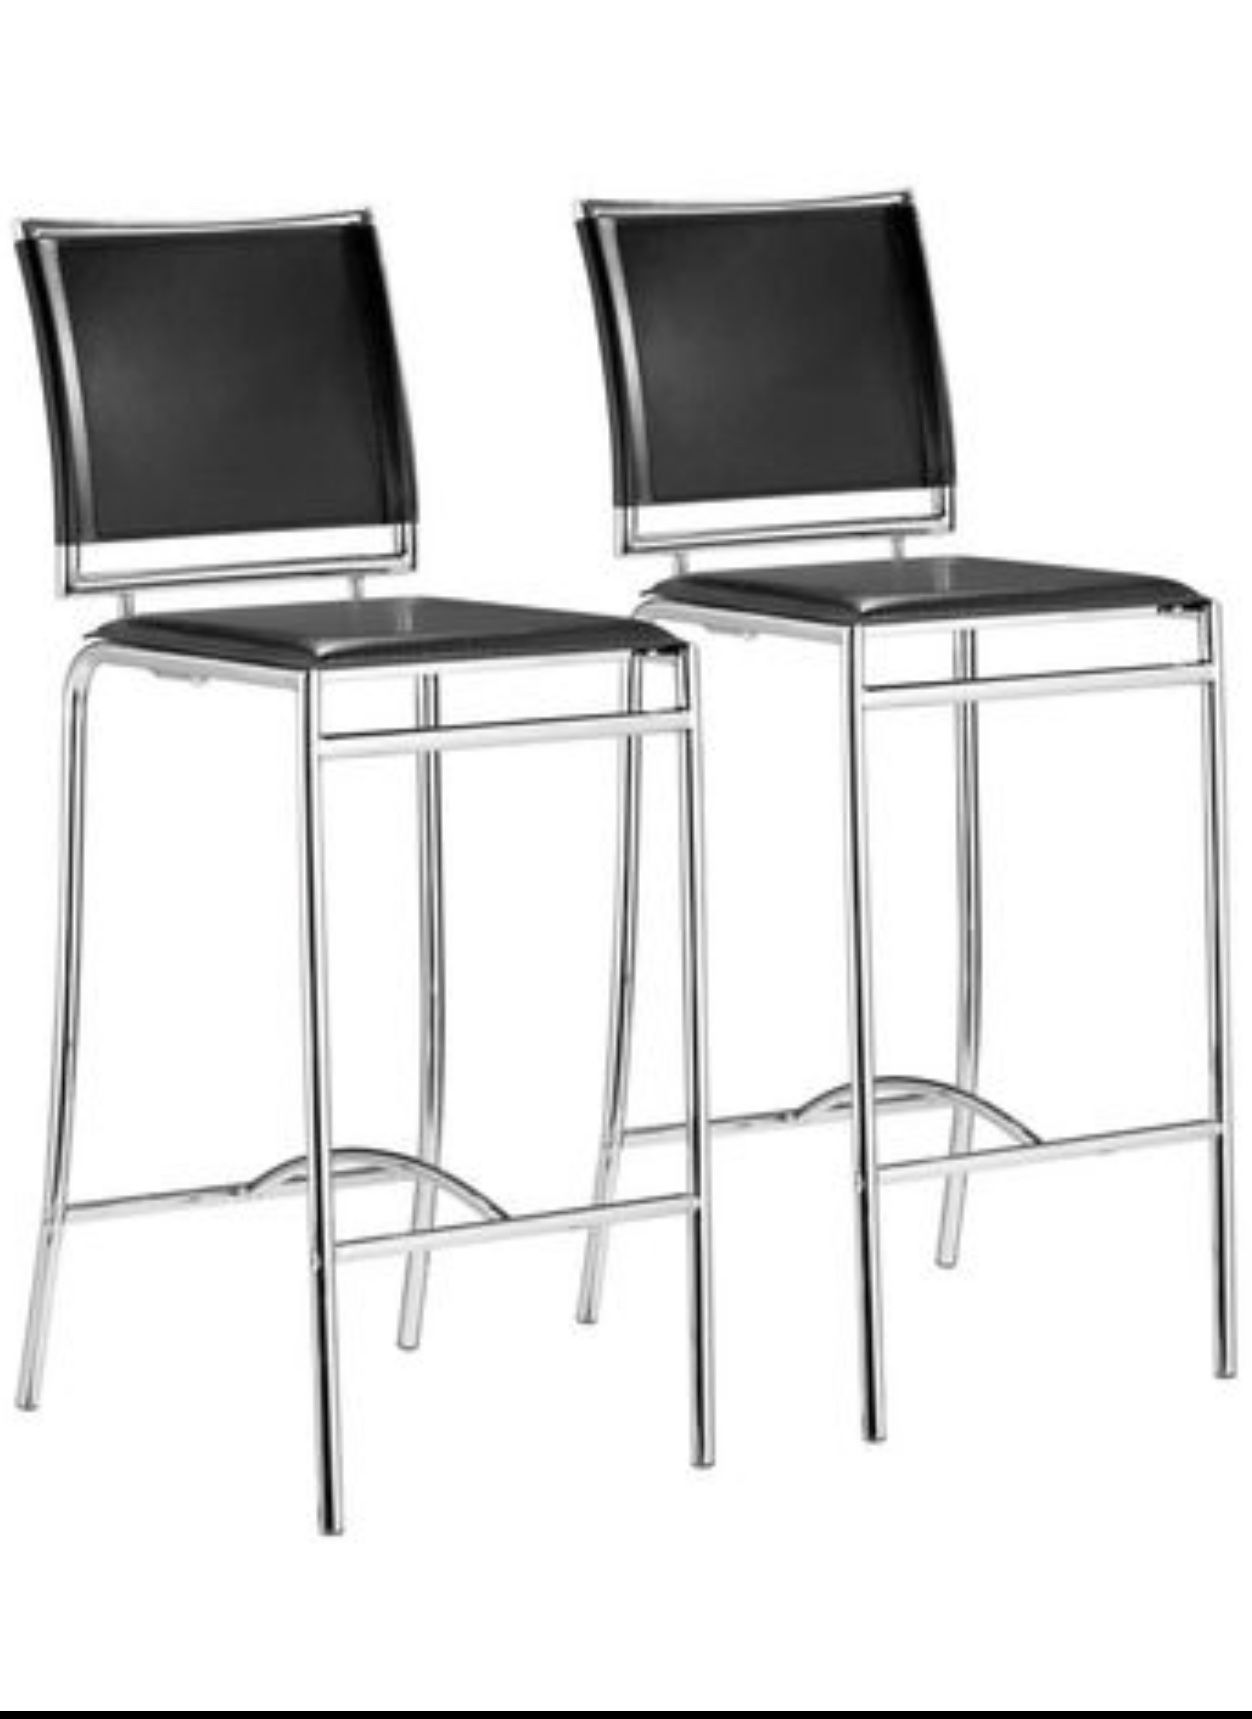 New Modern Set of 2 Counter Height Barstool Chairs - Black Leather Upholstery with Chrome Metal